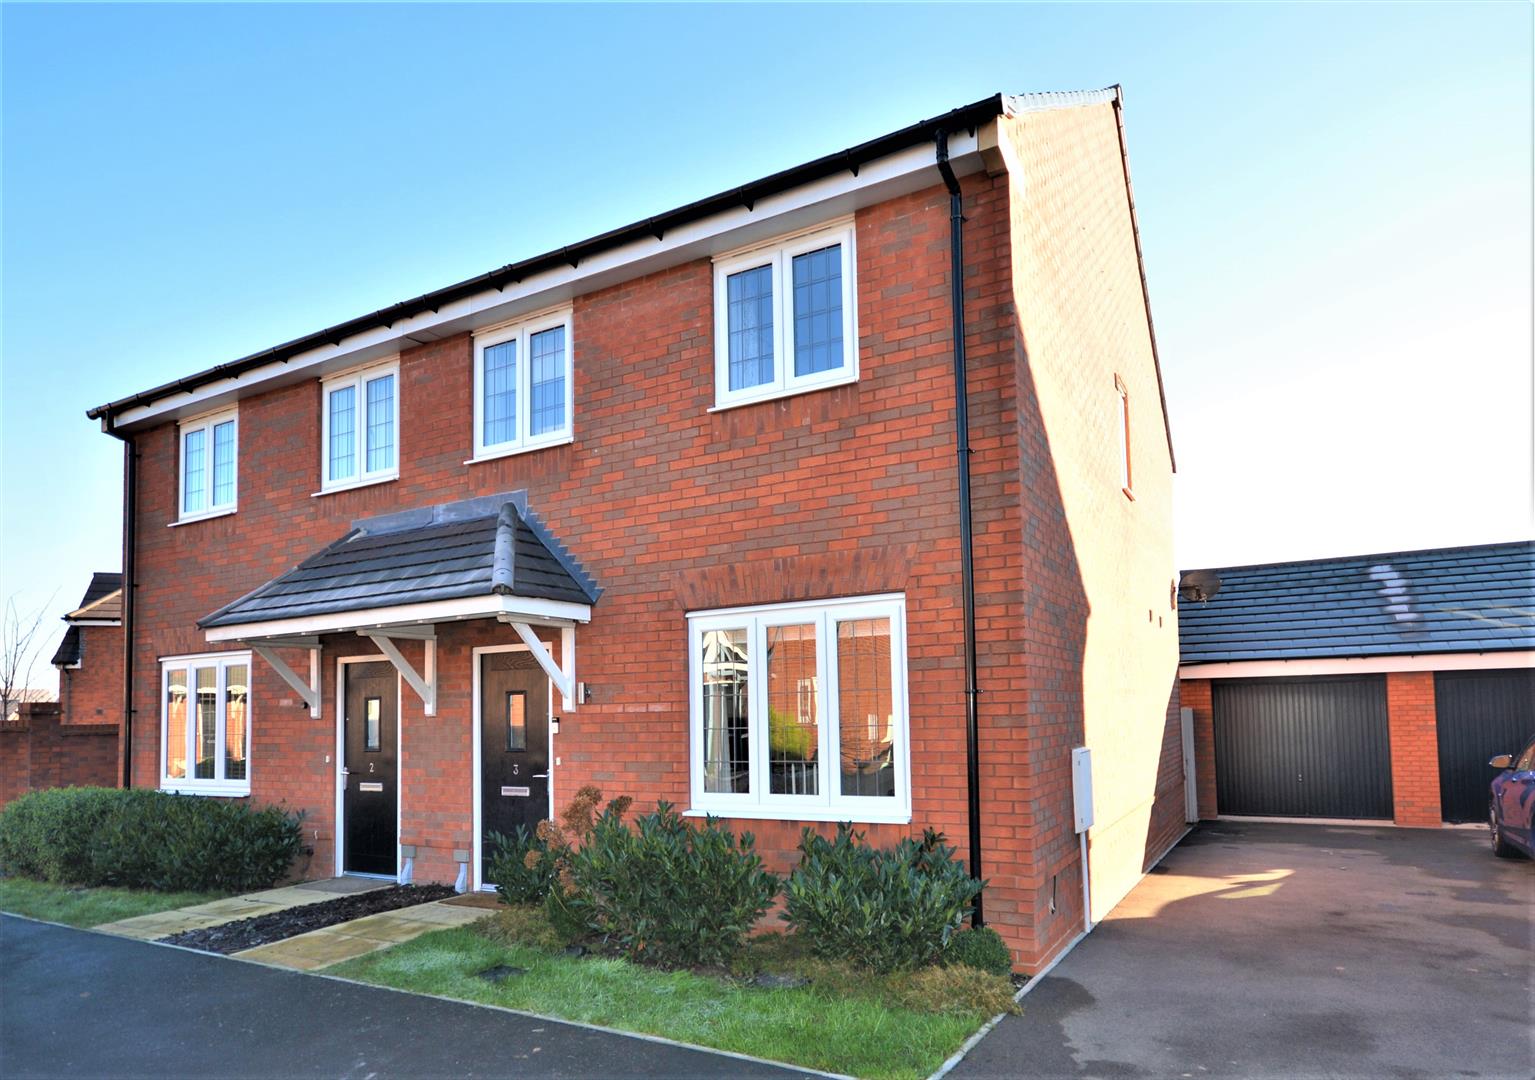 3 bed semi-detached for sale in Holmer, HR4